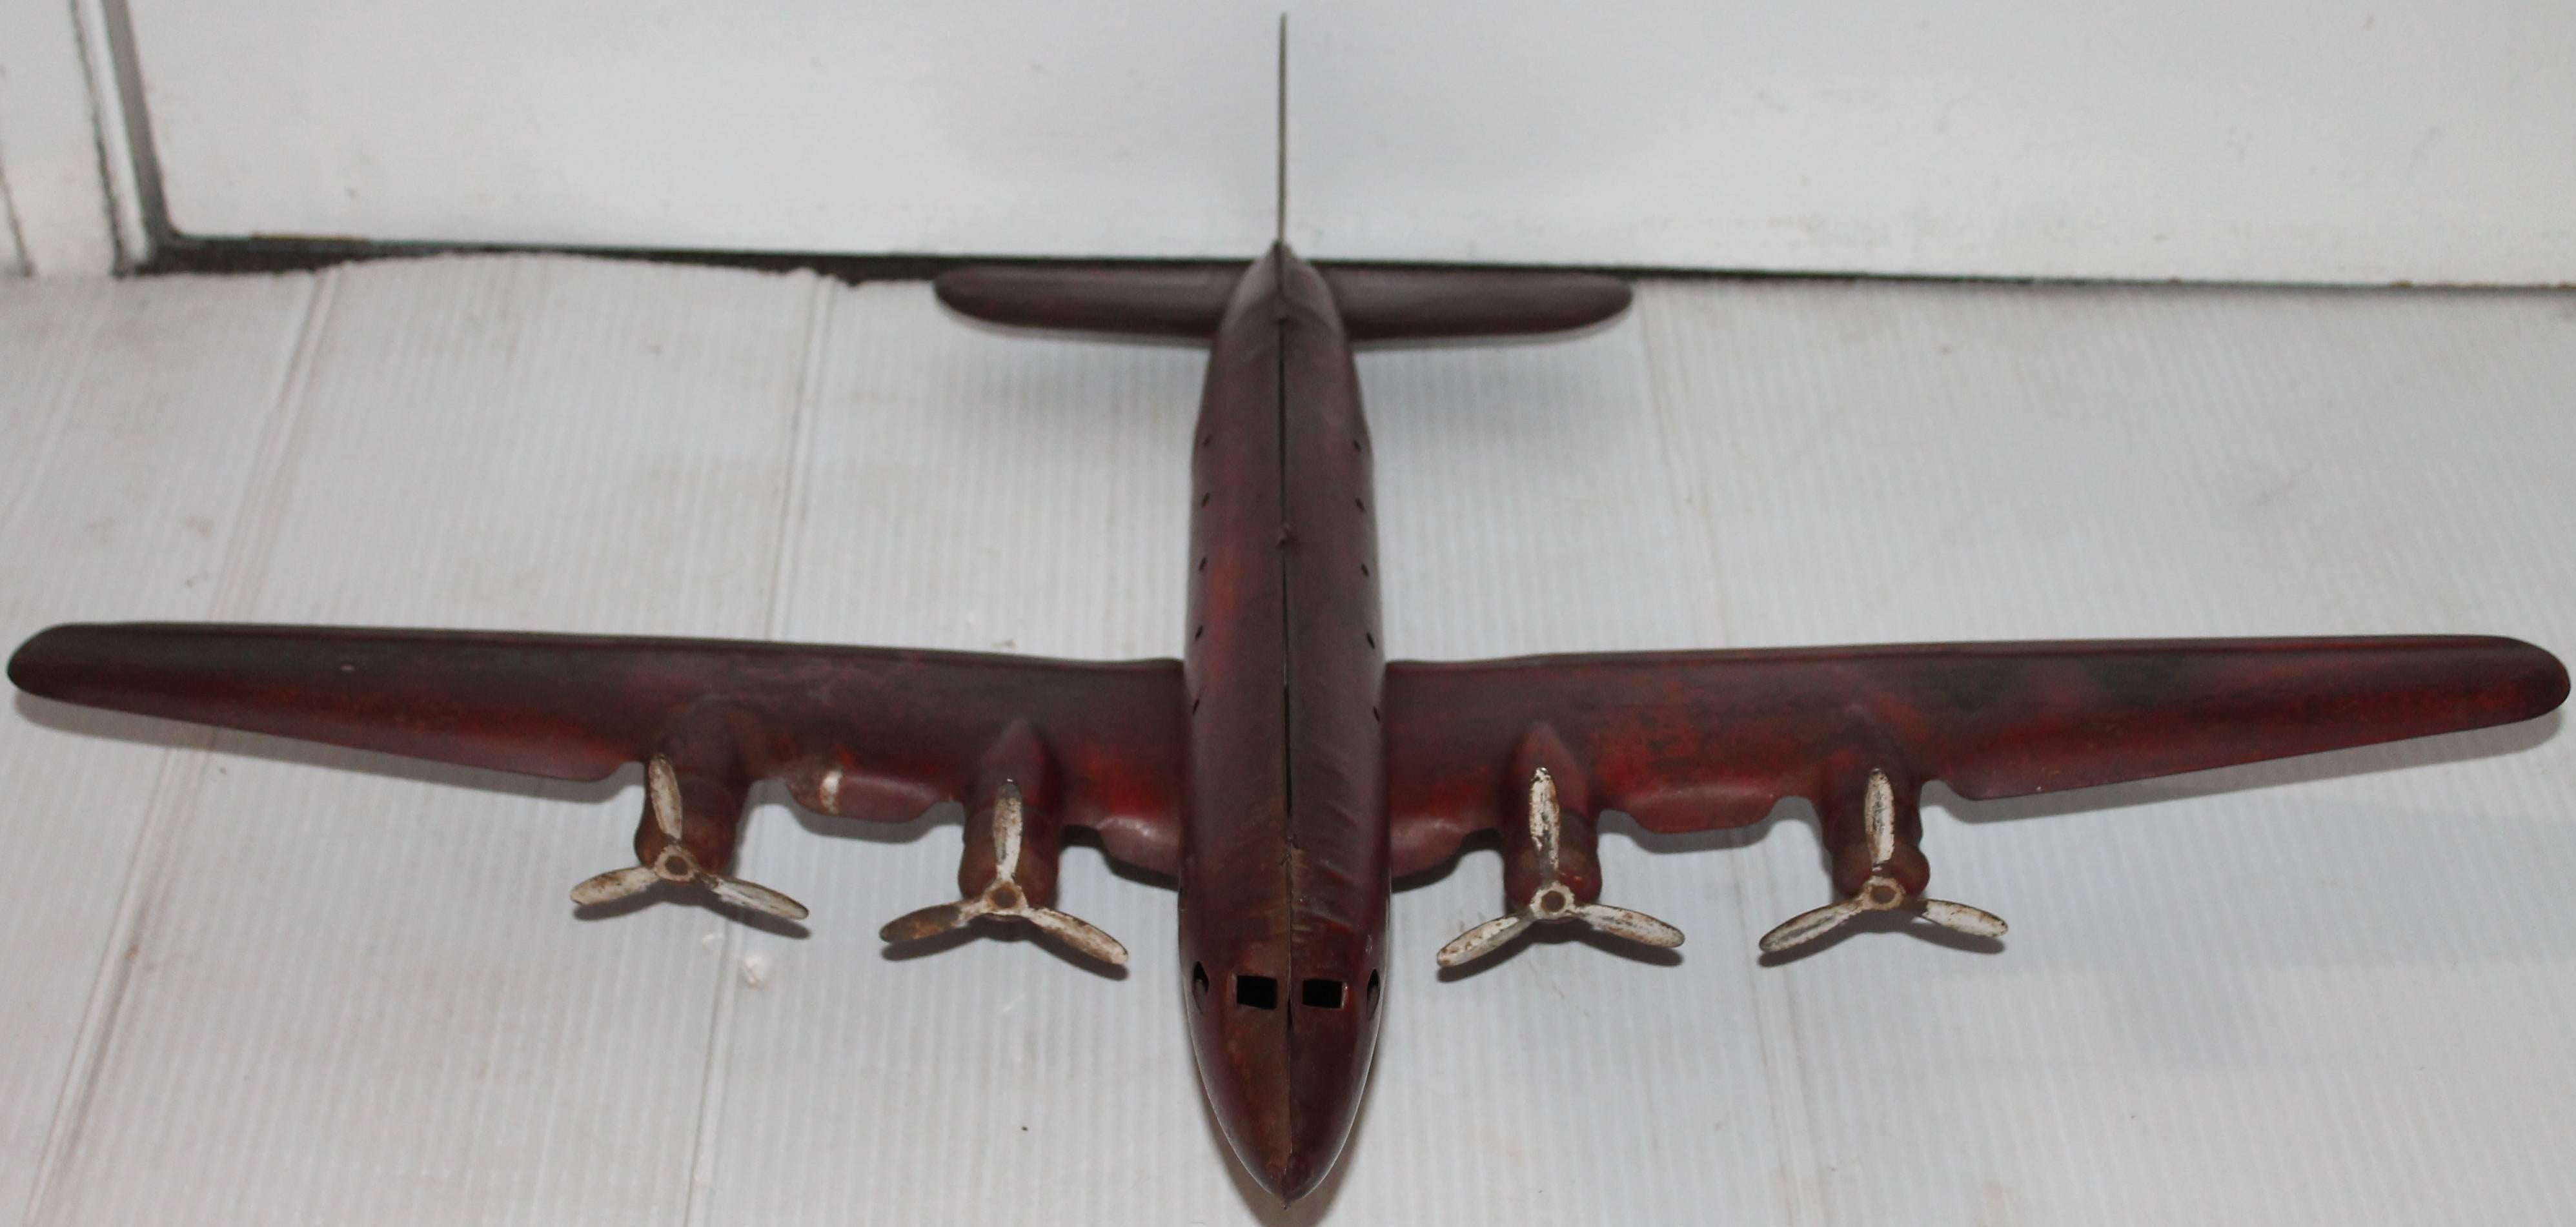 This unusual painted tin airplane is in very good working condition. It is painted AA in black letters and NC2100. The wheels are in original wood and original tin propellers. The surface is all original and undisturbed.